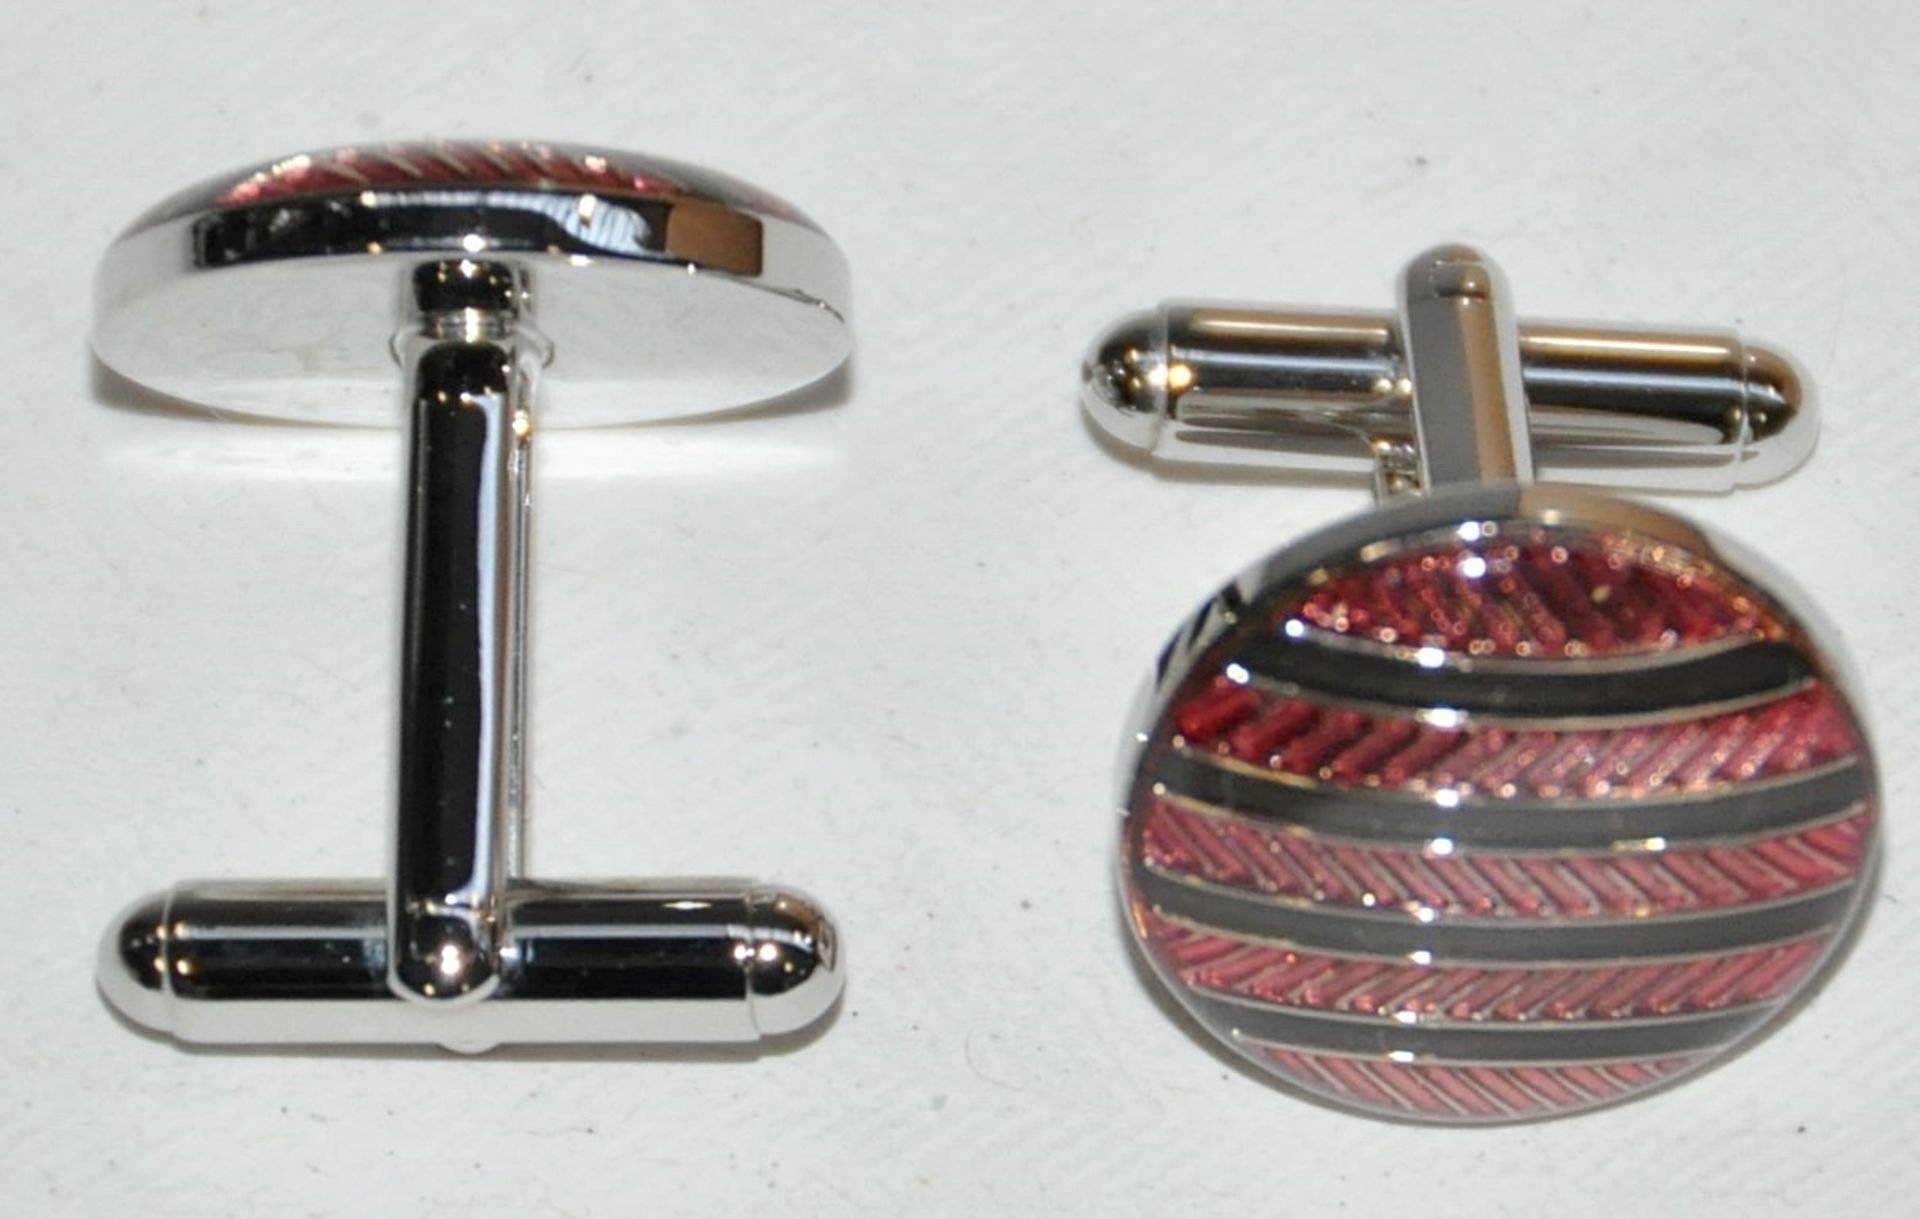 10 x Pairs of Genuine “Circle, Stripe” Enamel CUFFLINKS by Ice London – Silver Plated, 2 Colours - Image 2 of 3